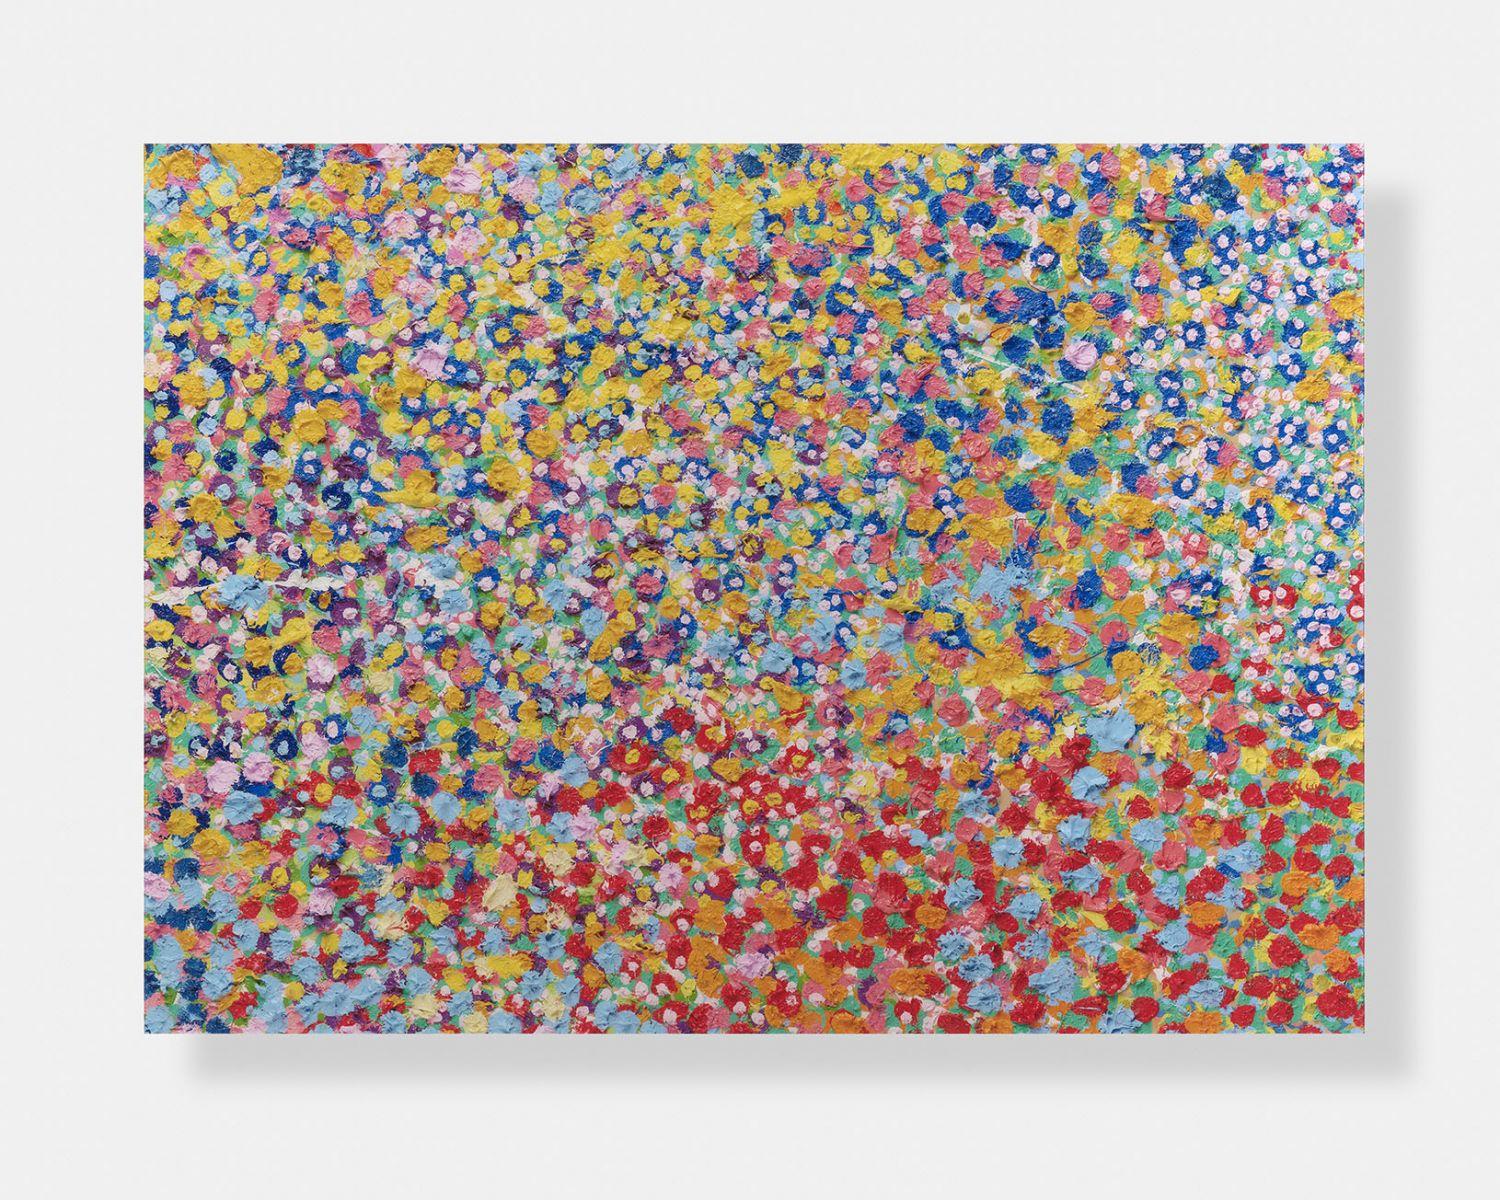 Damien Hirst
Cannizaro
H4-4


Diasec-mounted Giclée print on aluminium panel
920 x 1260 MM
Edition size: 75 + 5 AP

signed and numbered from an edition of 75 verso, published by HENI Editions; sheet: 92 x 126cm


Damien Hirst first came to public